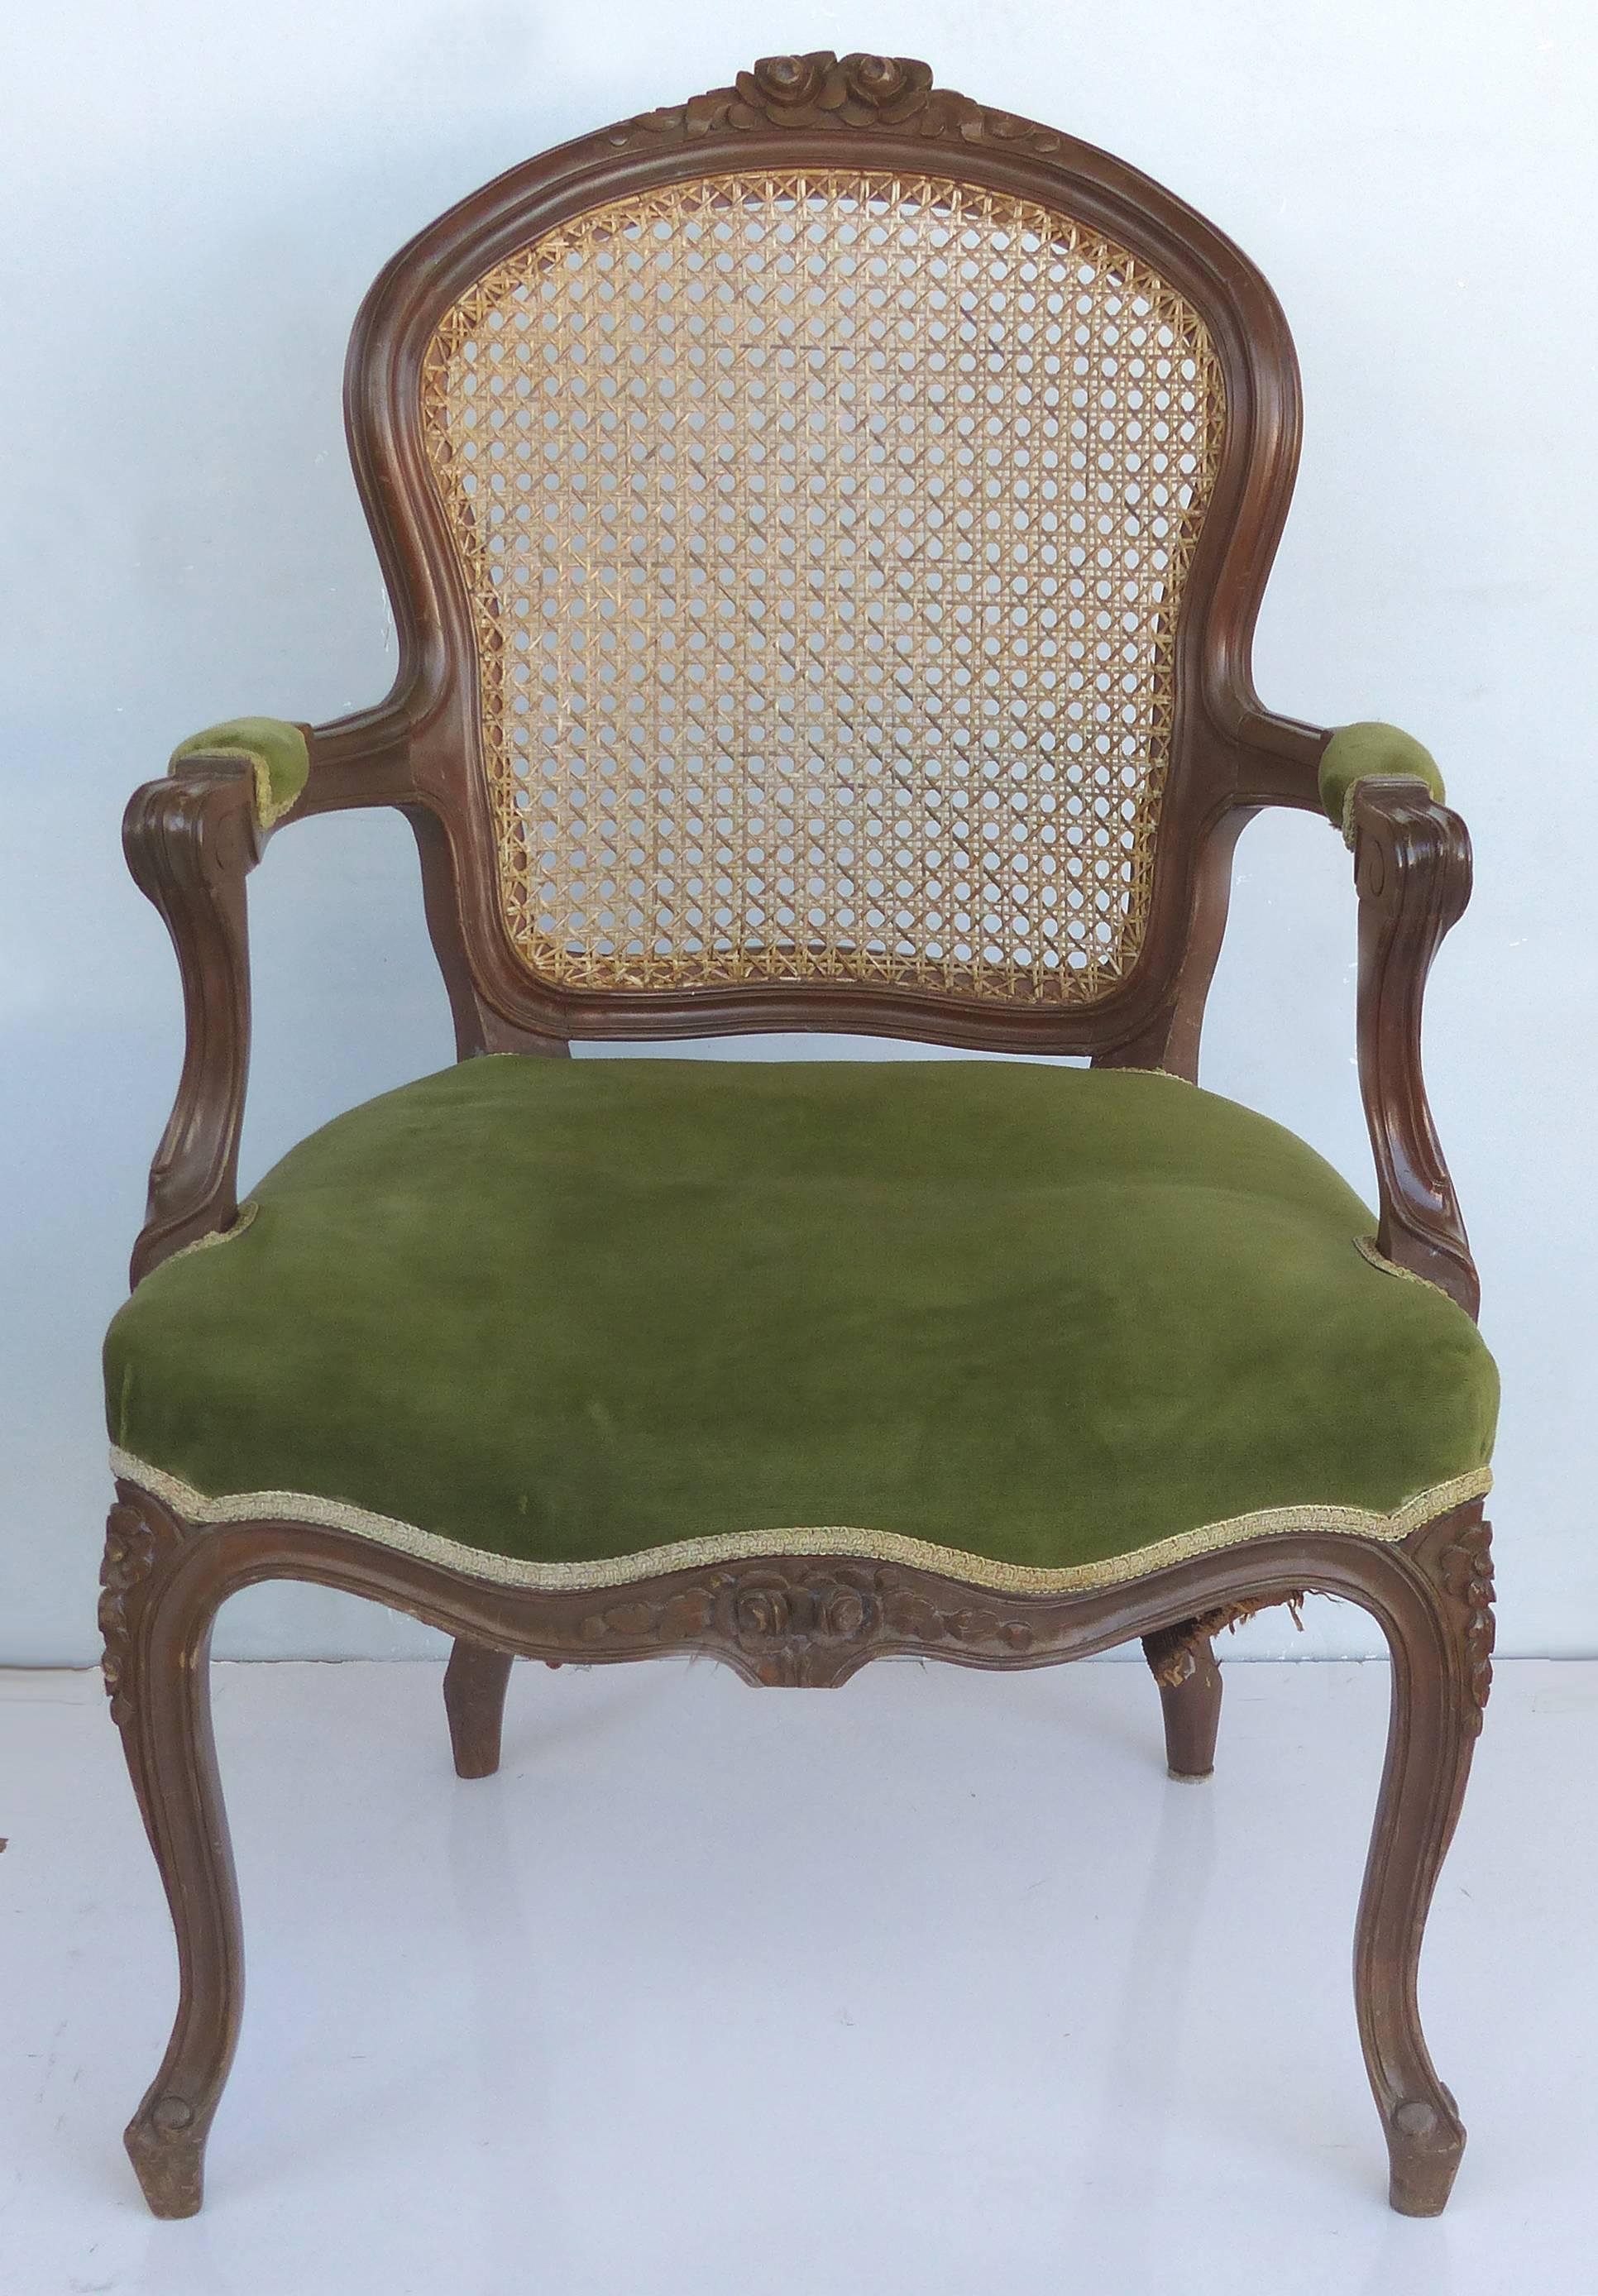 Offered for sale is a pair of French Louis XV style fauteuil armchairs with walnut frames, hand-caned backs and nicely upholstered seats with velvet mohair seats finished with a nice trim. Measure: Arm, 25